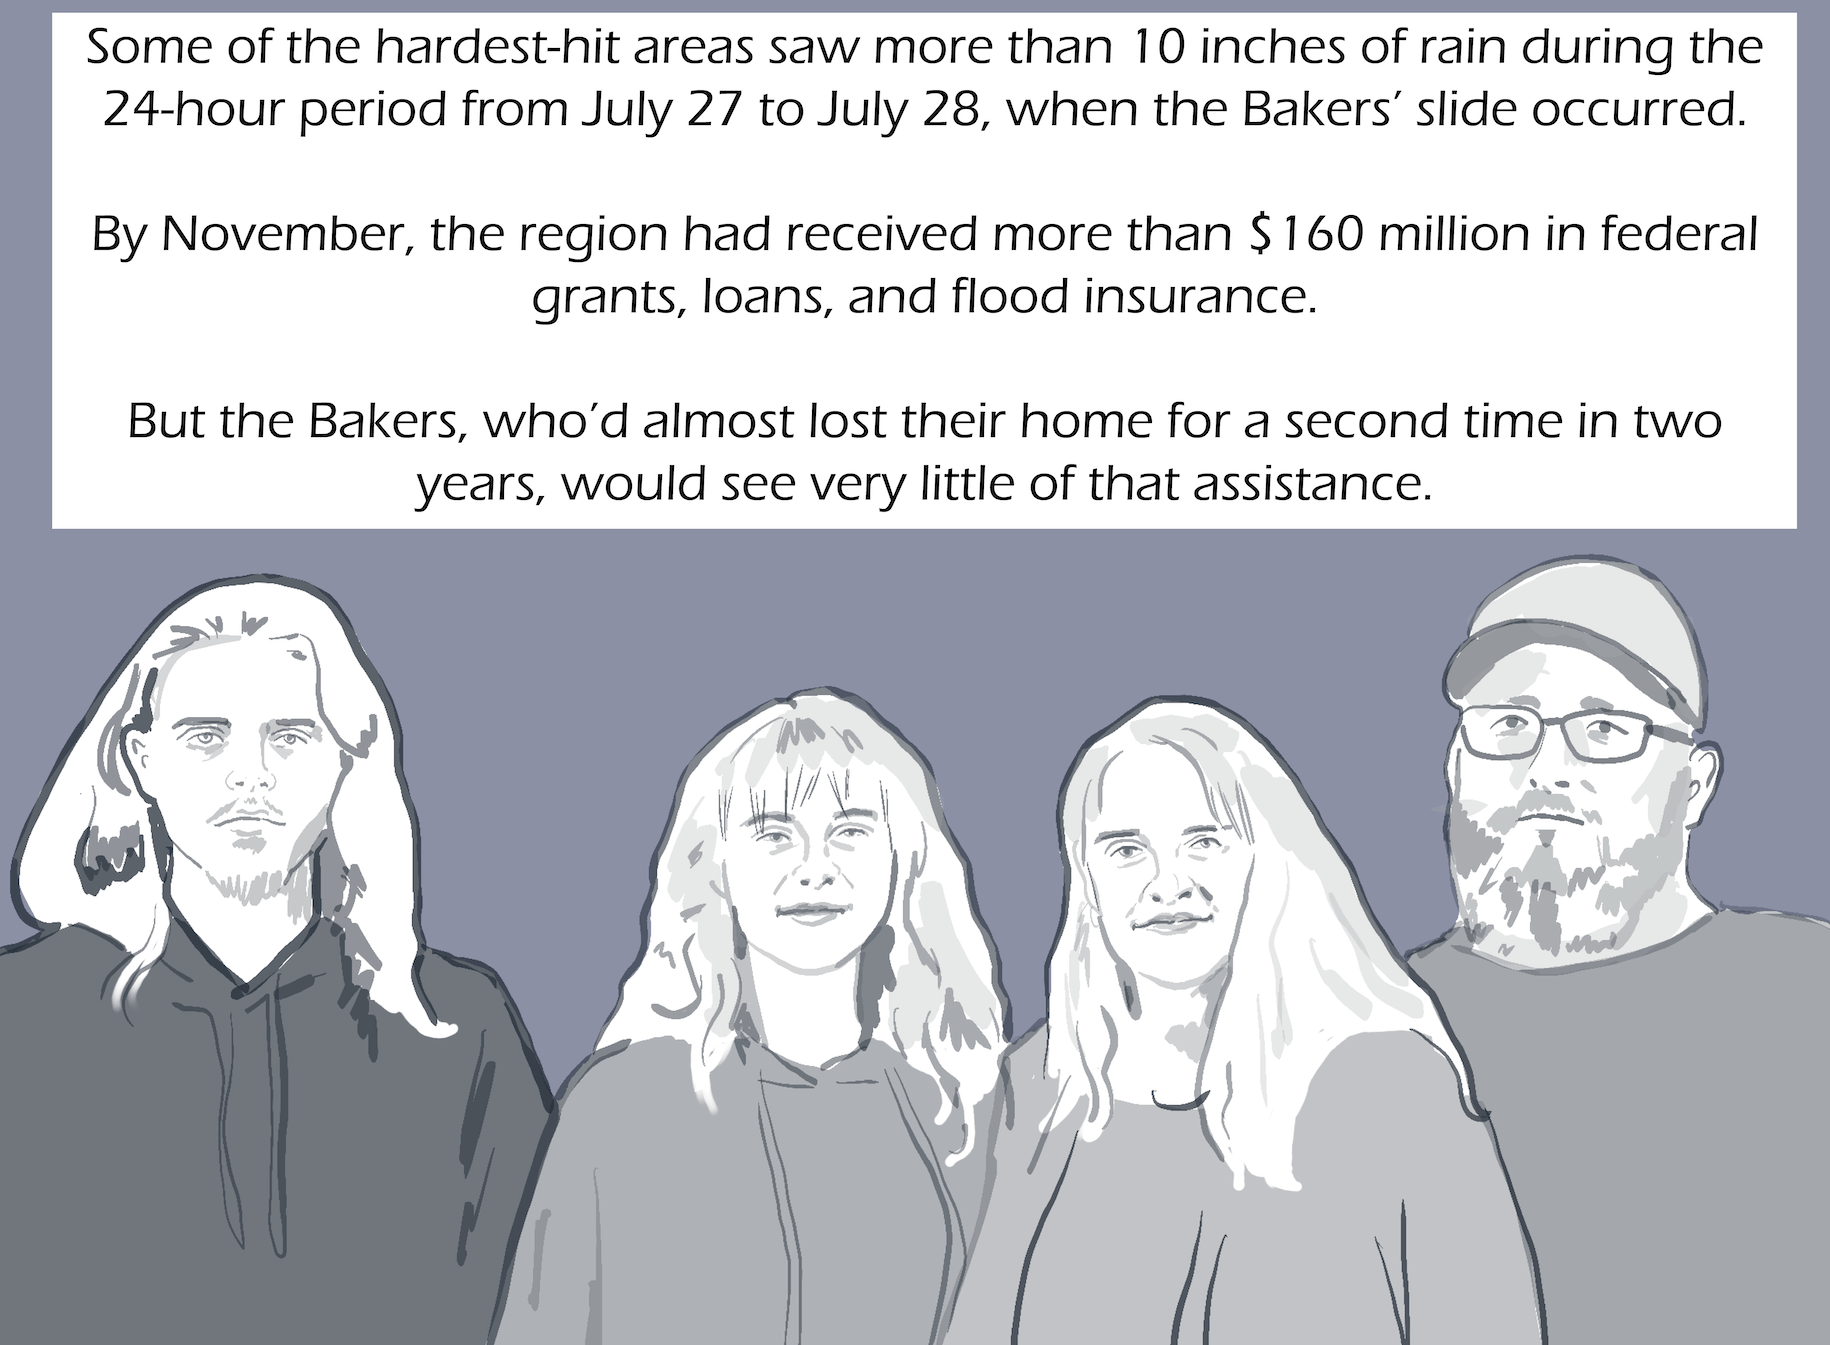 Four people, a younger man with long hair, a younger woman, an adult woman, and an adult man with a beard. Text: Some of the hardest-hit areas saw more than 10 inches of rain during the 24-hour period from July 27 to July 28, when the Bakers’ slide occurred. By November, the region had received more than $160 million in federal grants, loans, and flood insurance. But the Bakers, who’d almost lost their home for a second time in two years, would see very little of that assistance.